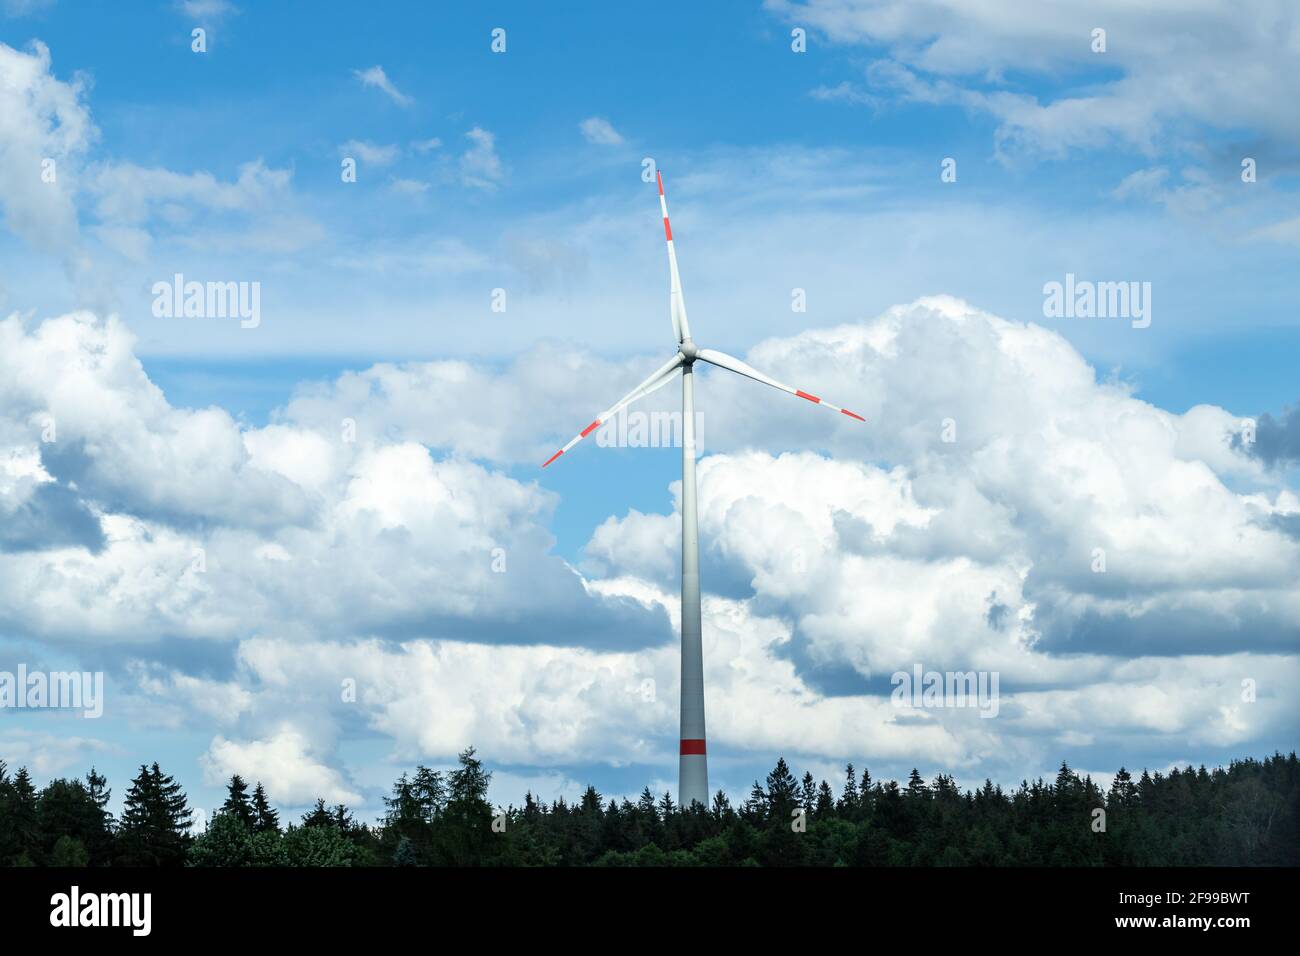 A pinwheel above a forest against a blue sky with clouds. Stock Photo